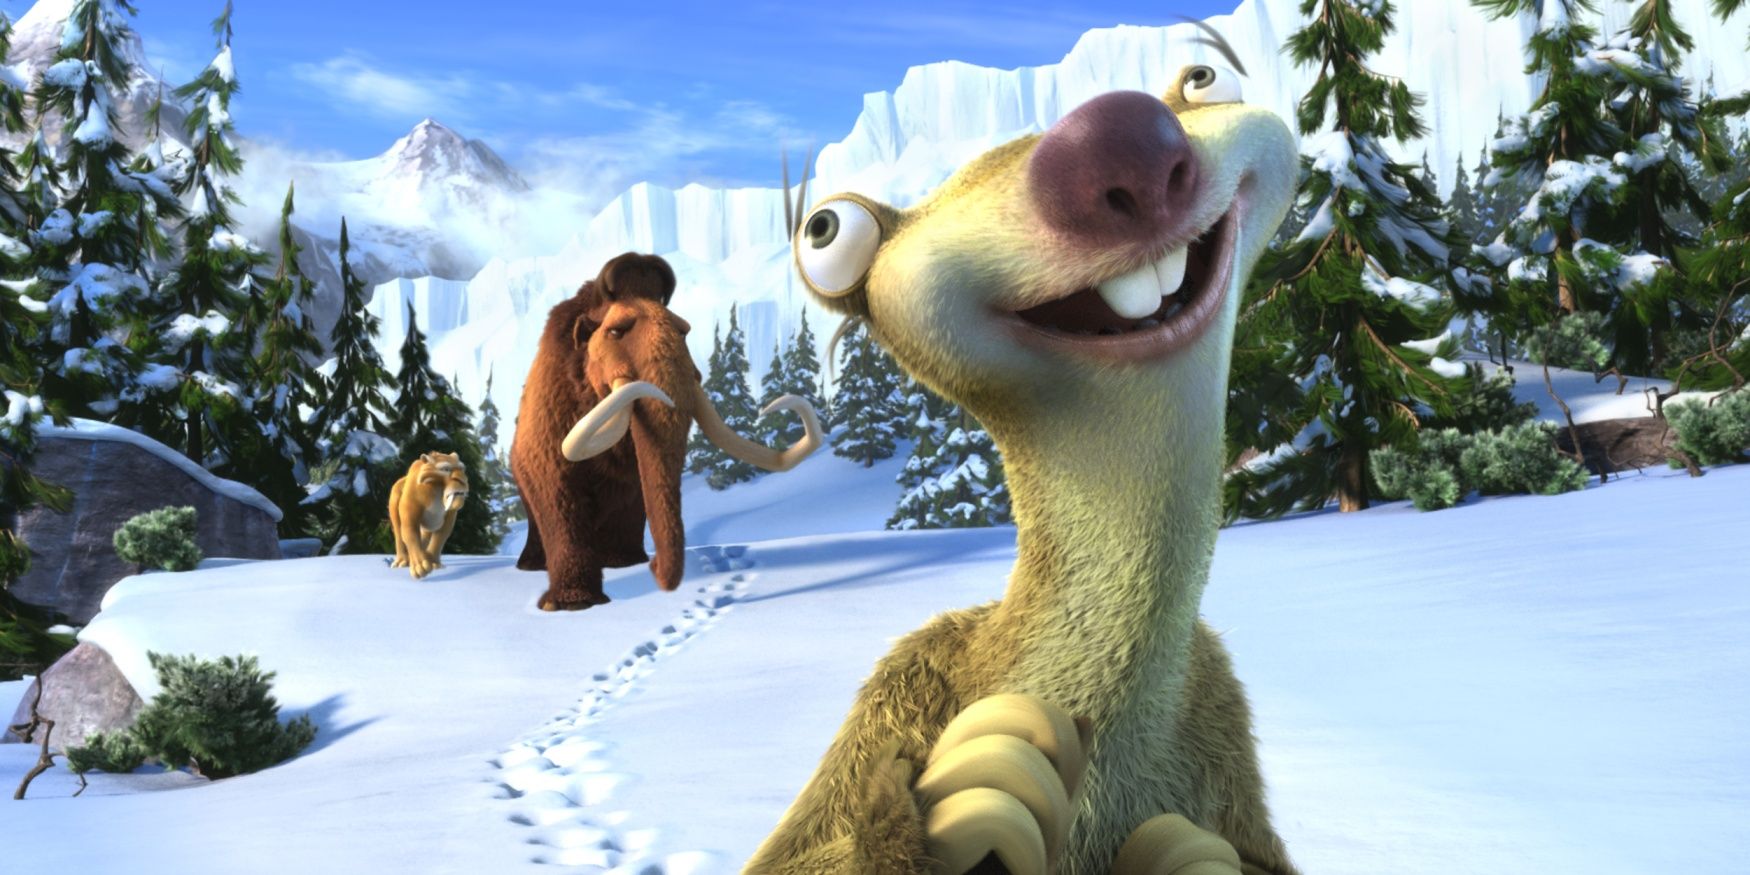 Sid in the foreground, with Manny and Diego in the background walking through snow in Ice Age